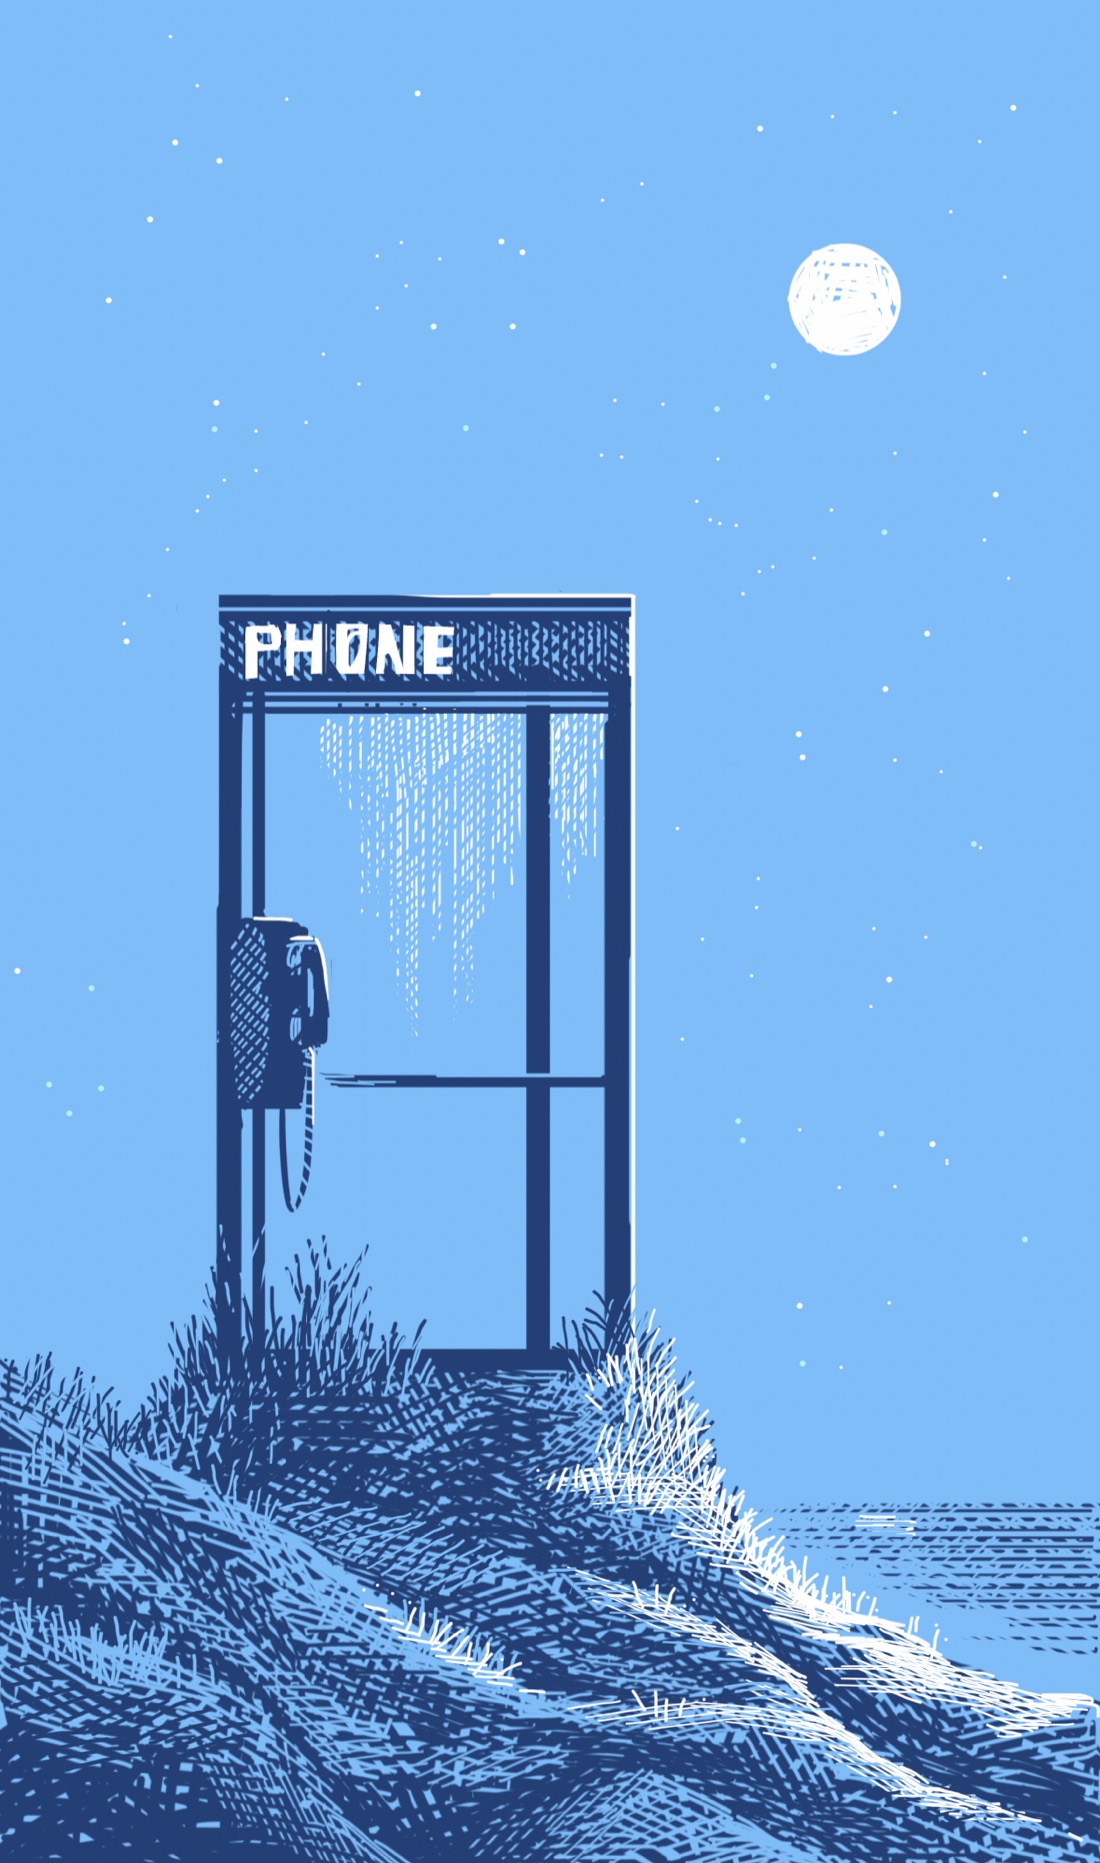 An old-style telephone booth stands on a small hillock at night, overlooking the ocean. The full moon is high in the sky. The sky is clear, filled with stars. No one is in the booth. Perhaps no one has been for quite some time.